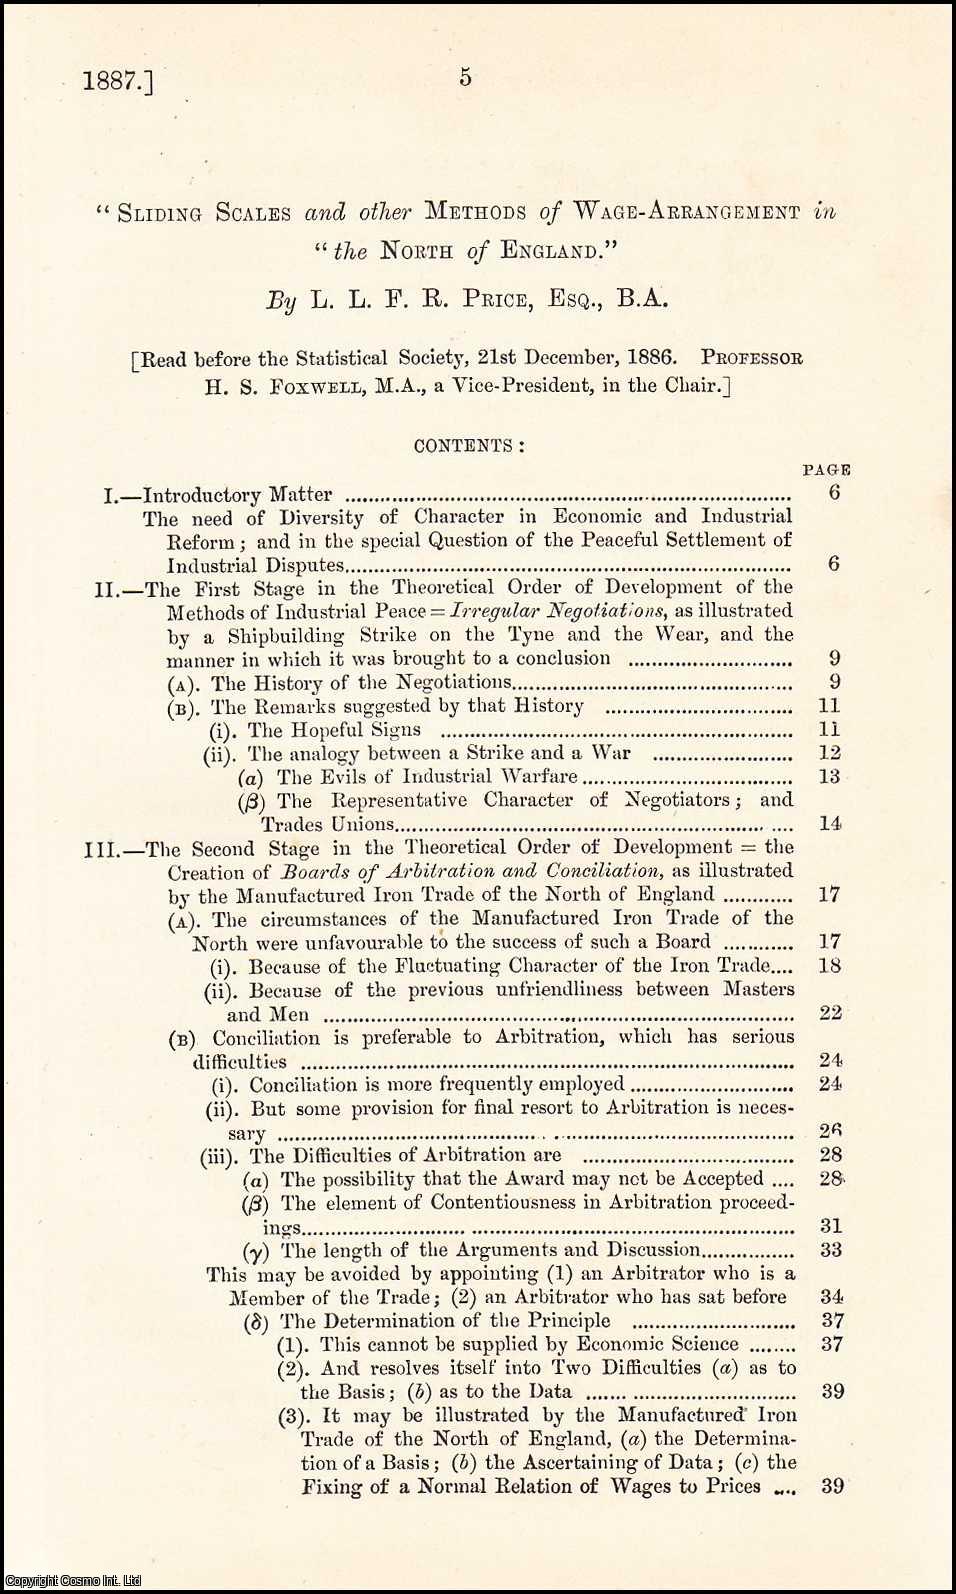 L.L.F.R. Price, Esq., B.A. - Sliding Scales & other Methods of Wage-Arrangement in the North of England. An uncommon original article from the Journal of the Royal Statistical Society of London, 1887.